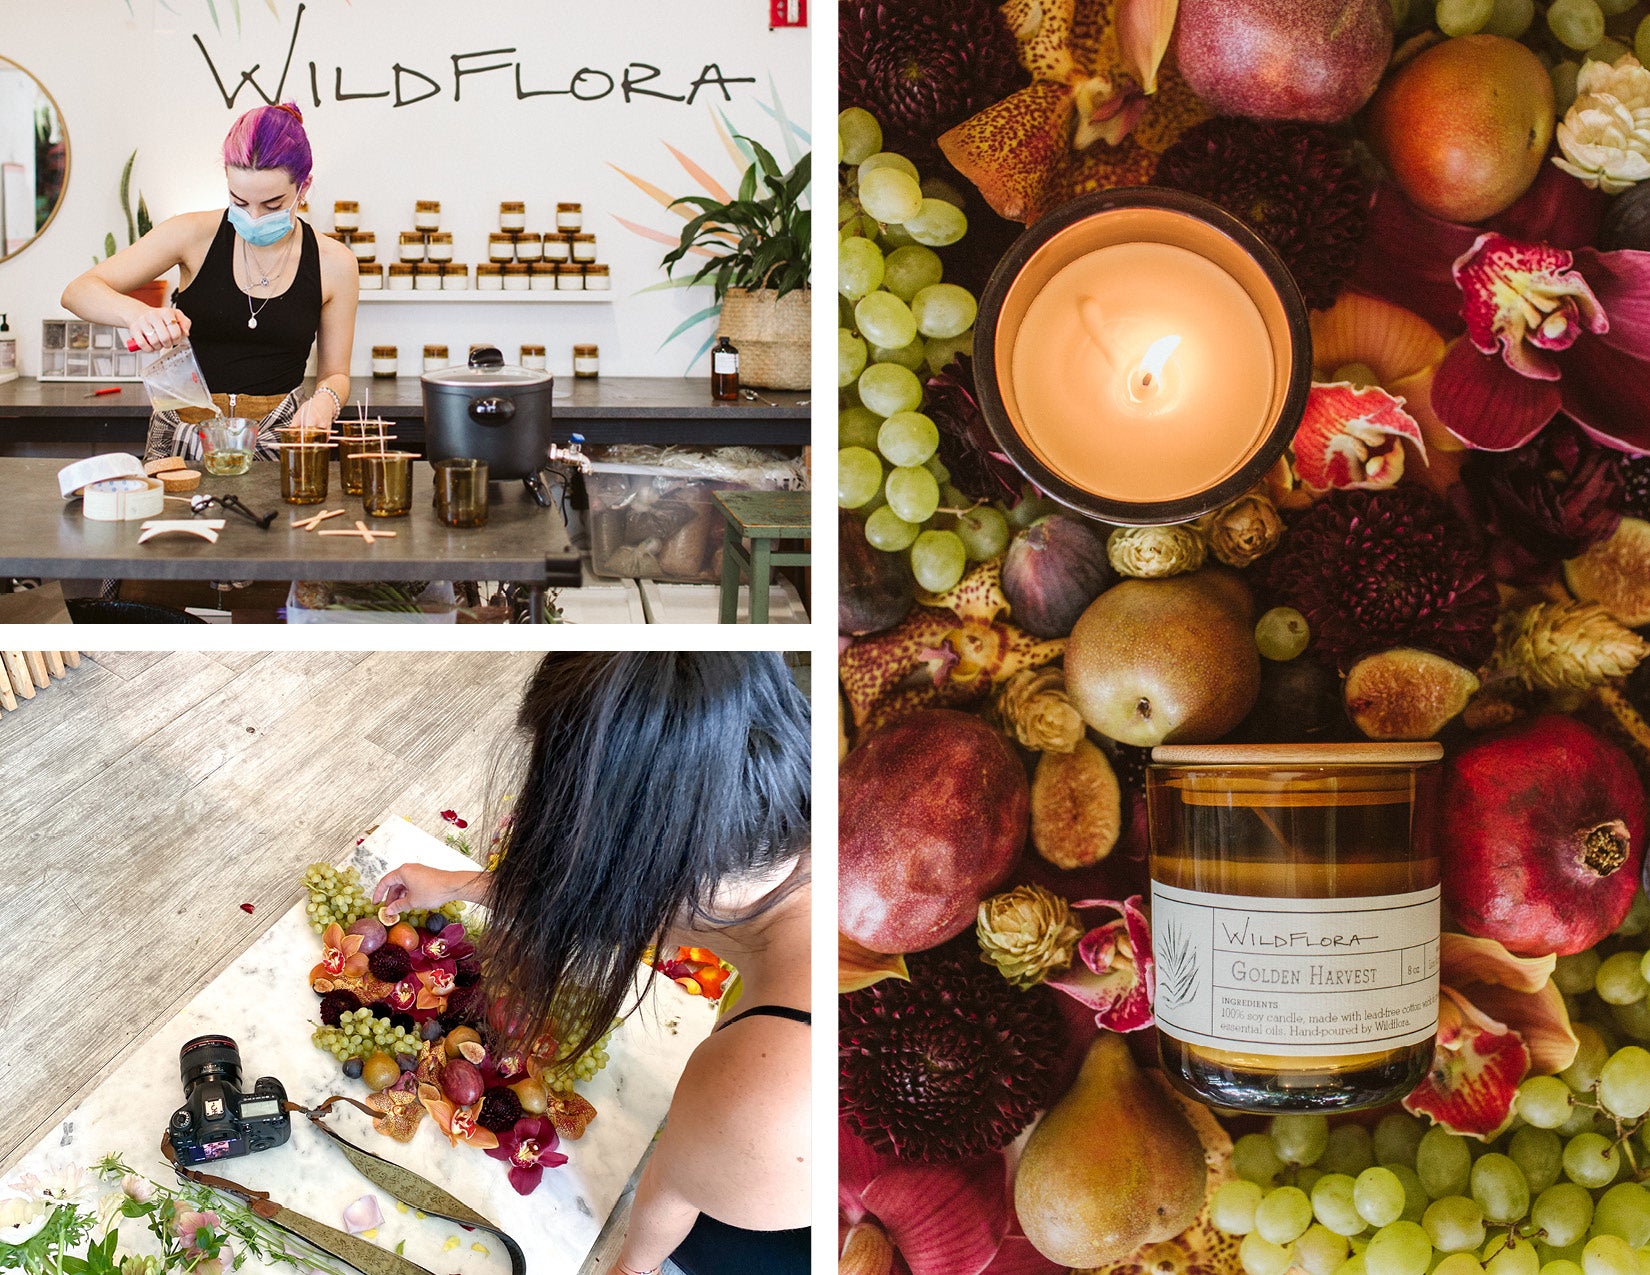 WildFlora small shop Saturday holiday business woman-owned behind the scenes fresh flowers florist candle pour handmade photography shoot fruit